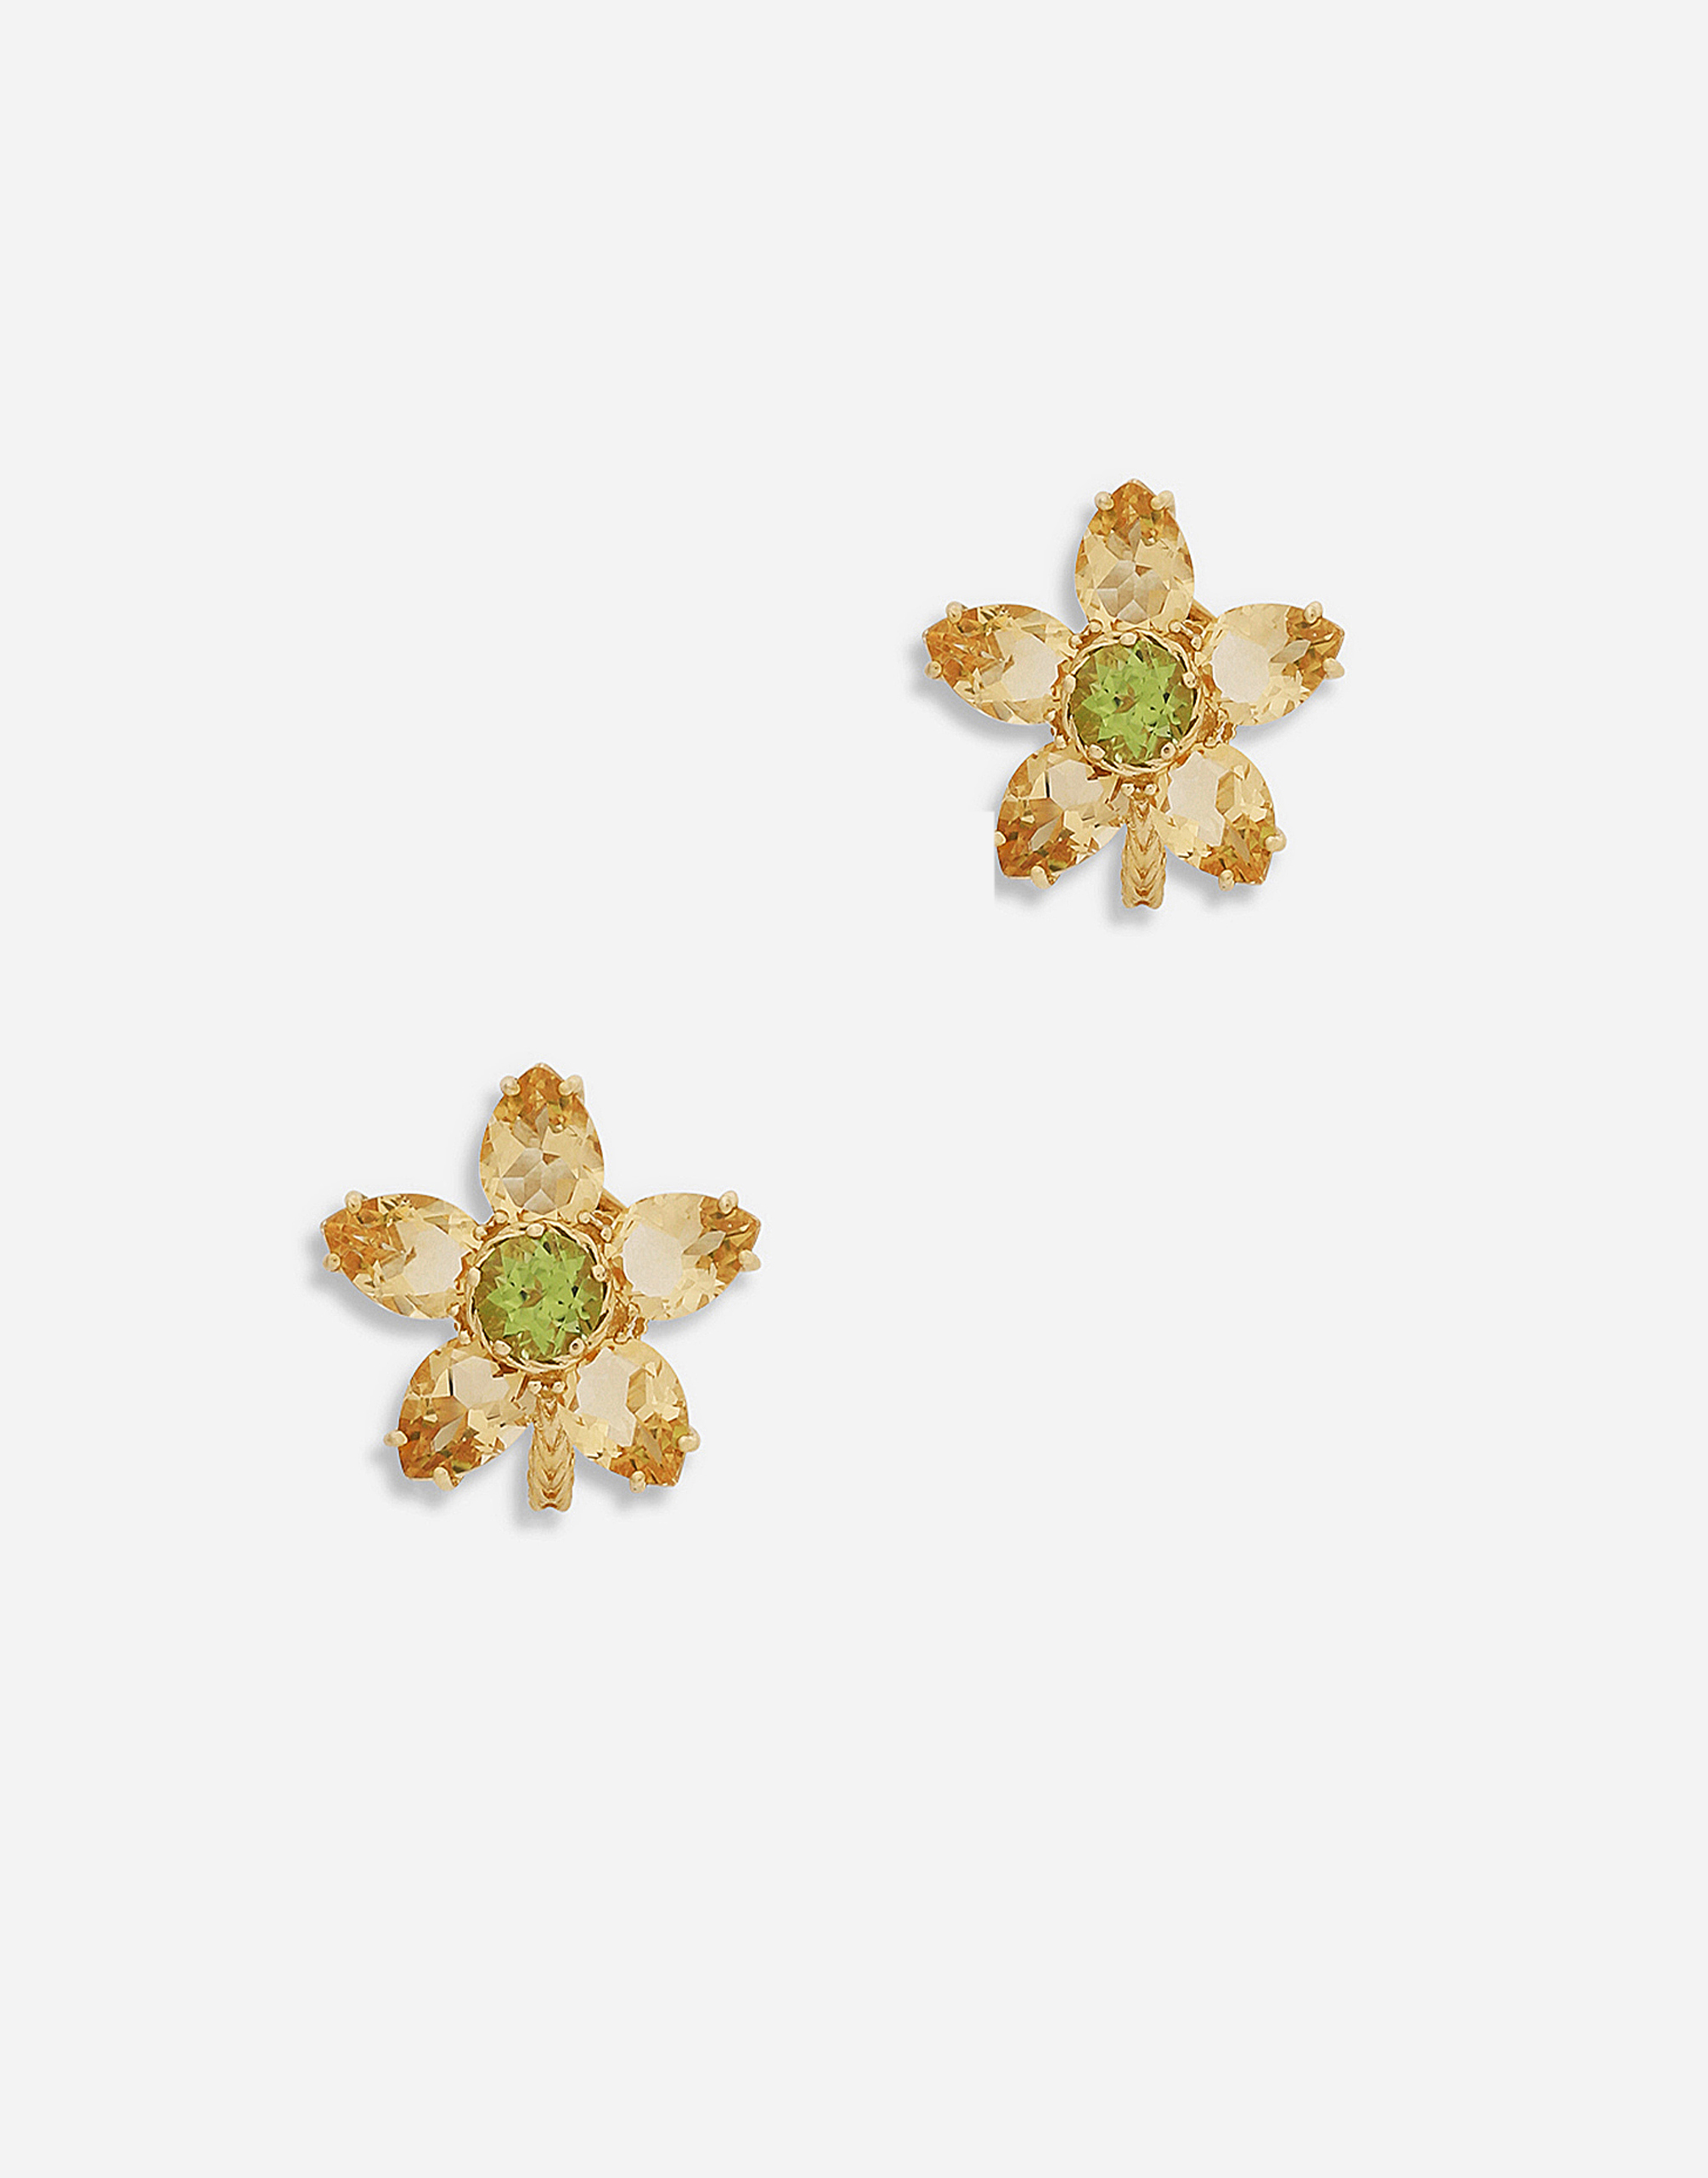 Women S Jewelry In Gold Spring Earrings In Yellow 18kt Gold With Citrine Flower Motif Dolce Gabbana